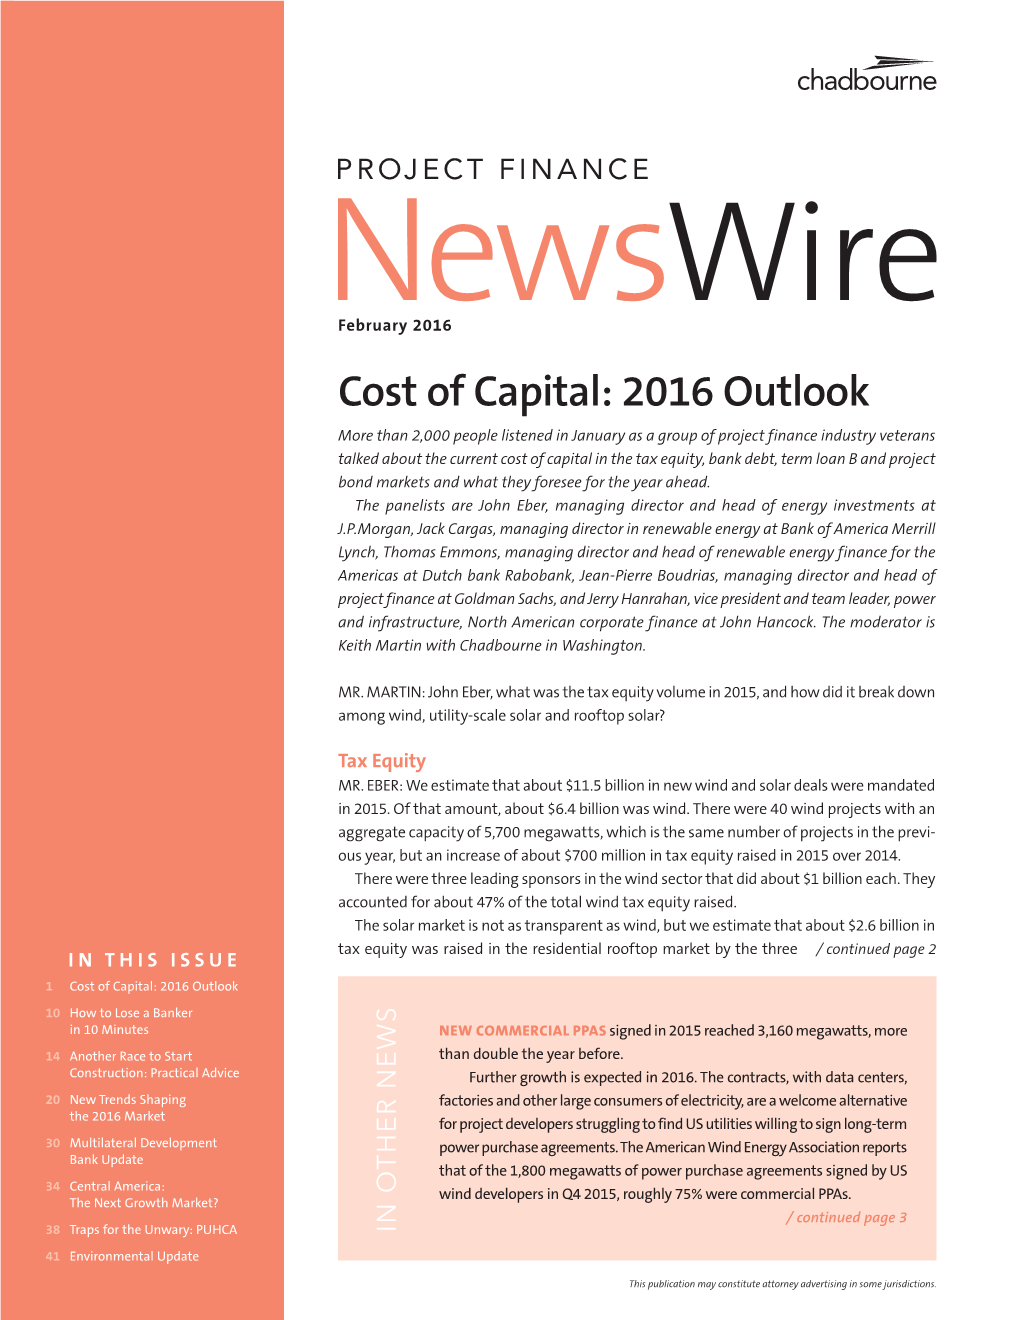 Download PDF of the Newswire